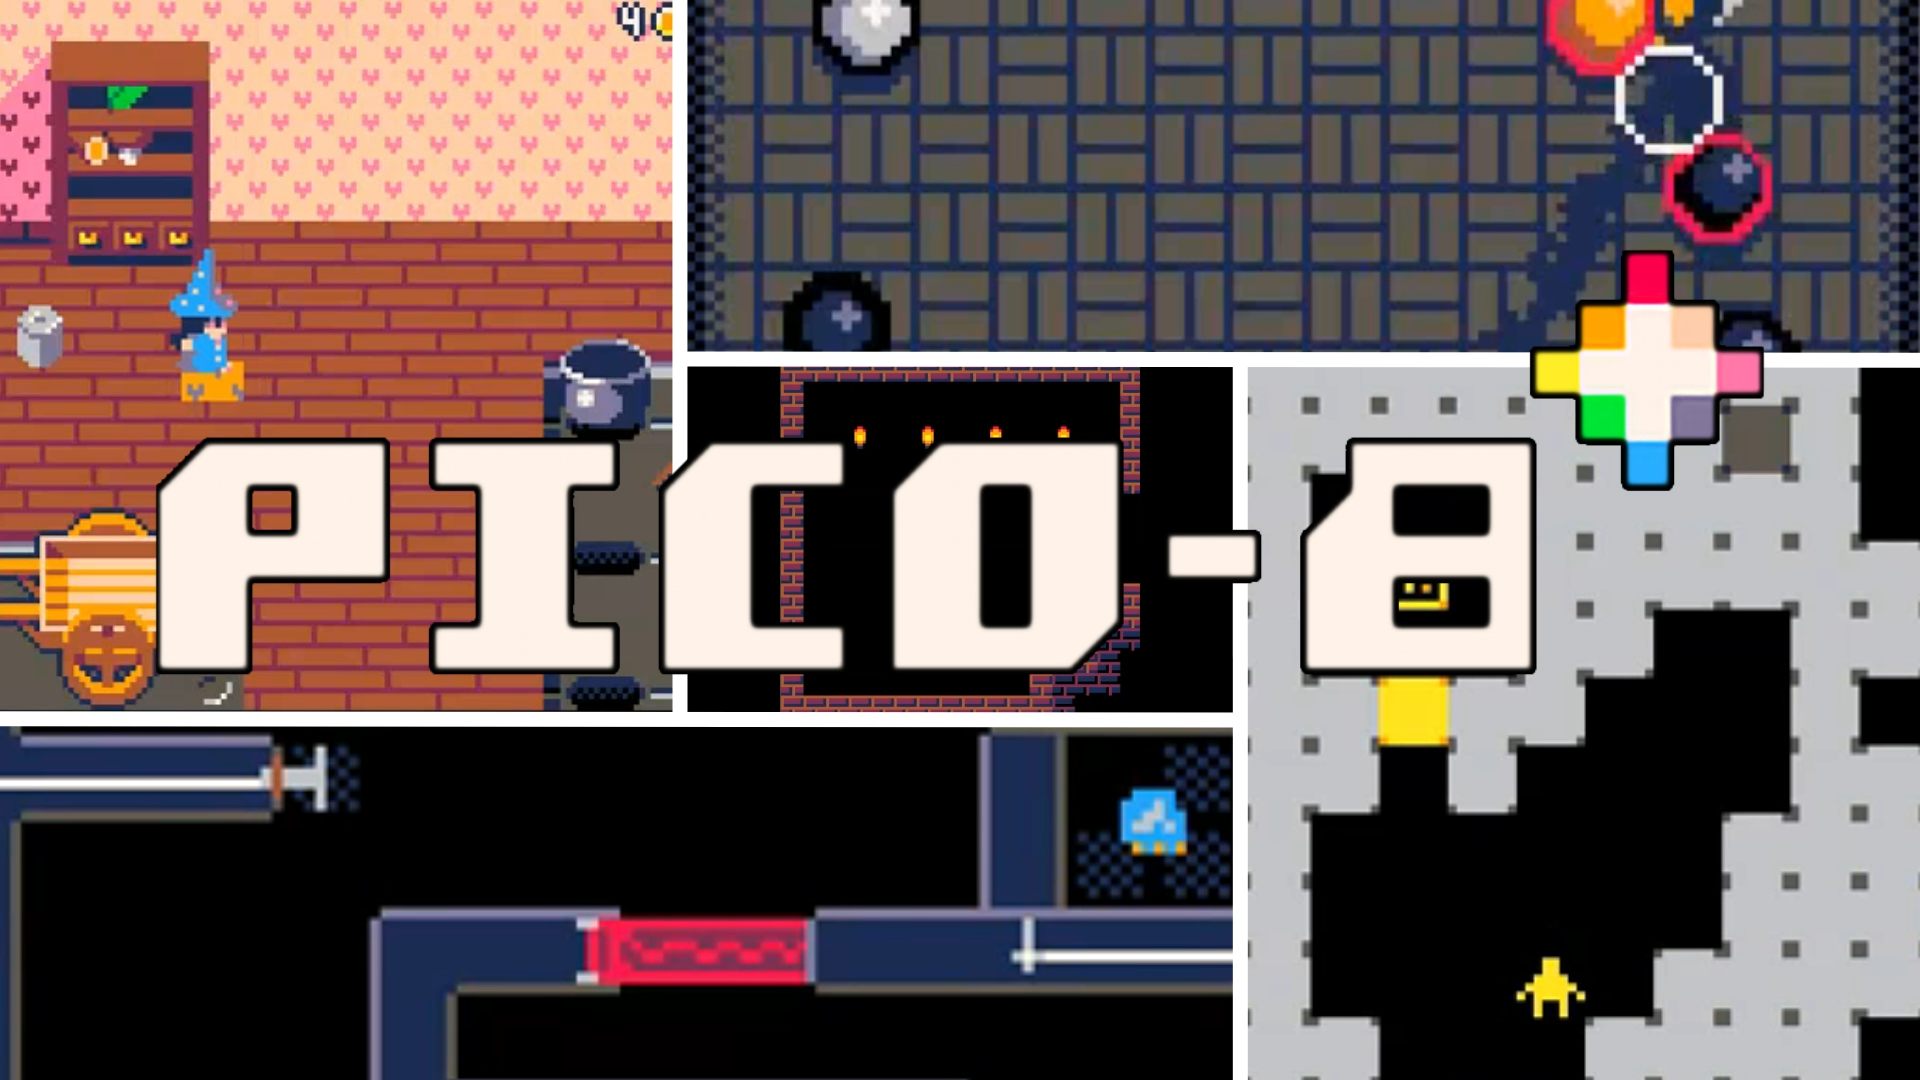 More information about "Pico-8 - Cinematic Video"